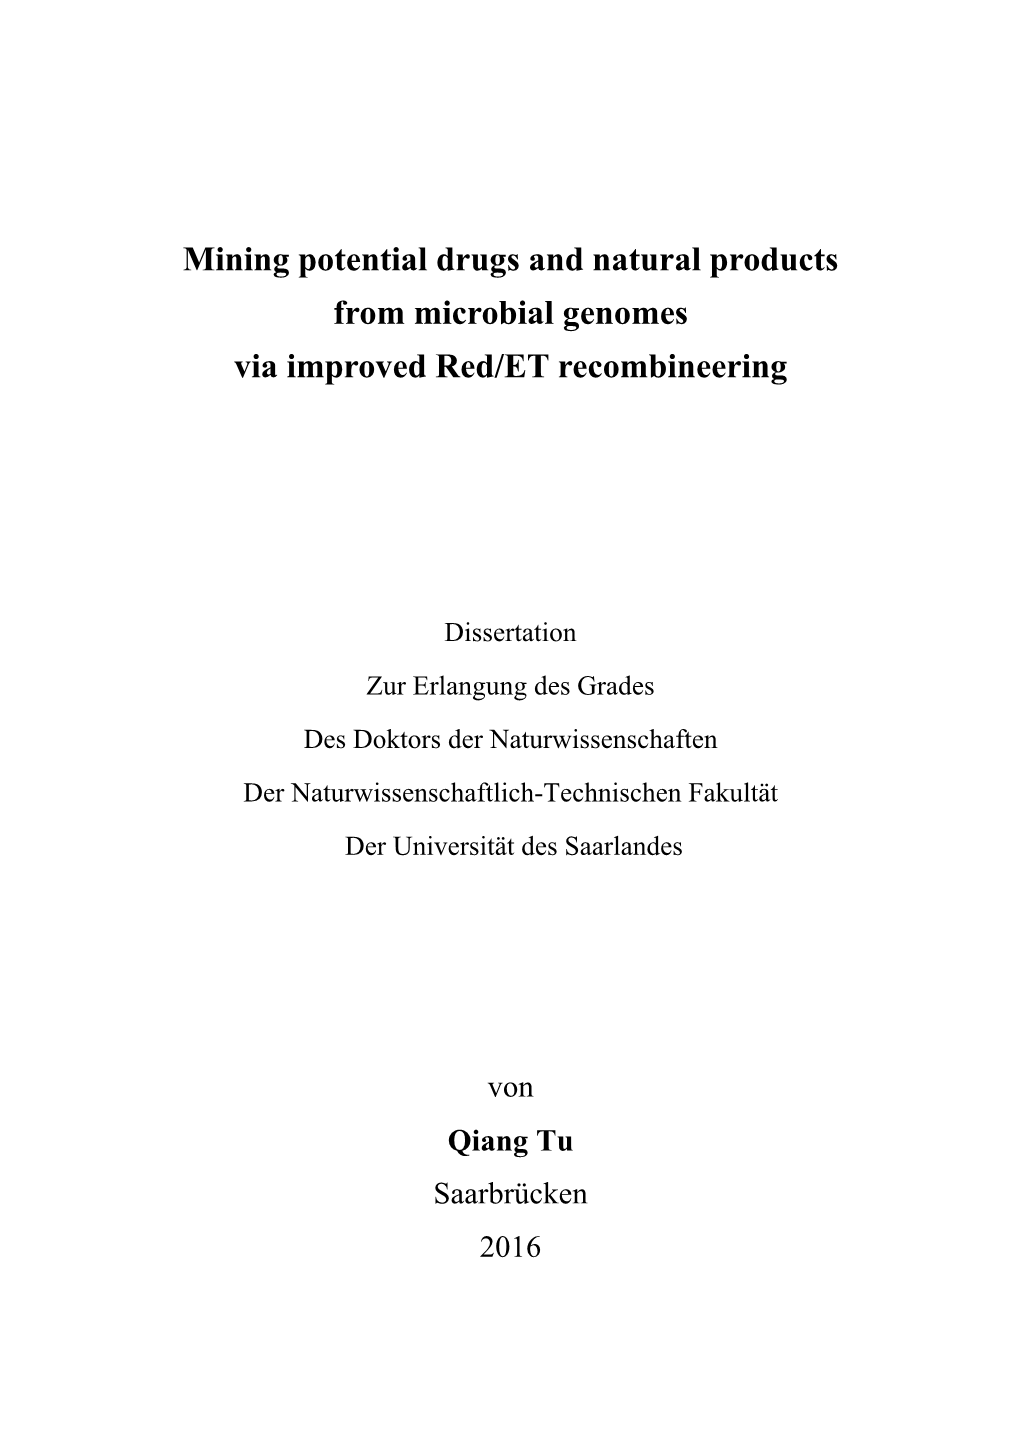 Mining Potential Drugs and Natural Products from Microbial Genomes Via Improved Red/ET Recombineering